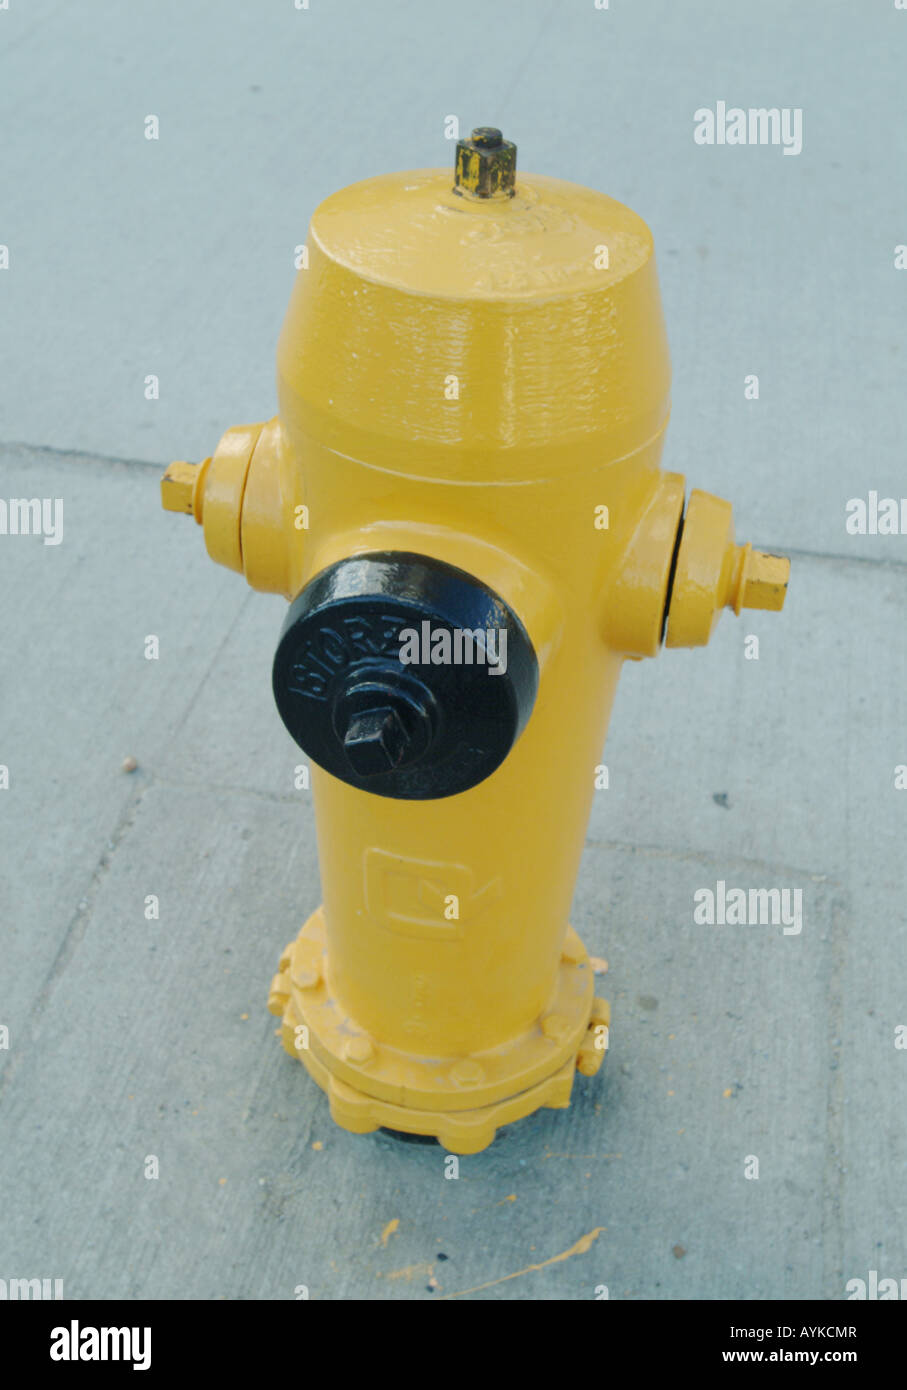 Fire hydrant or fire plug johnny pump Stock Photo